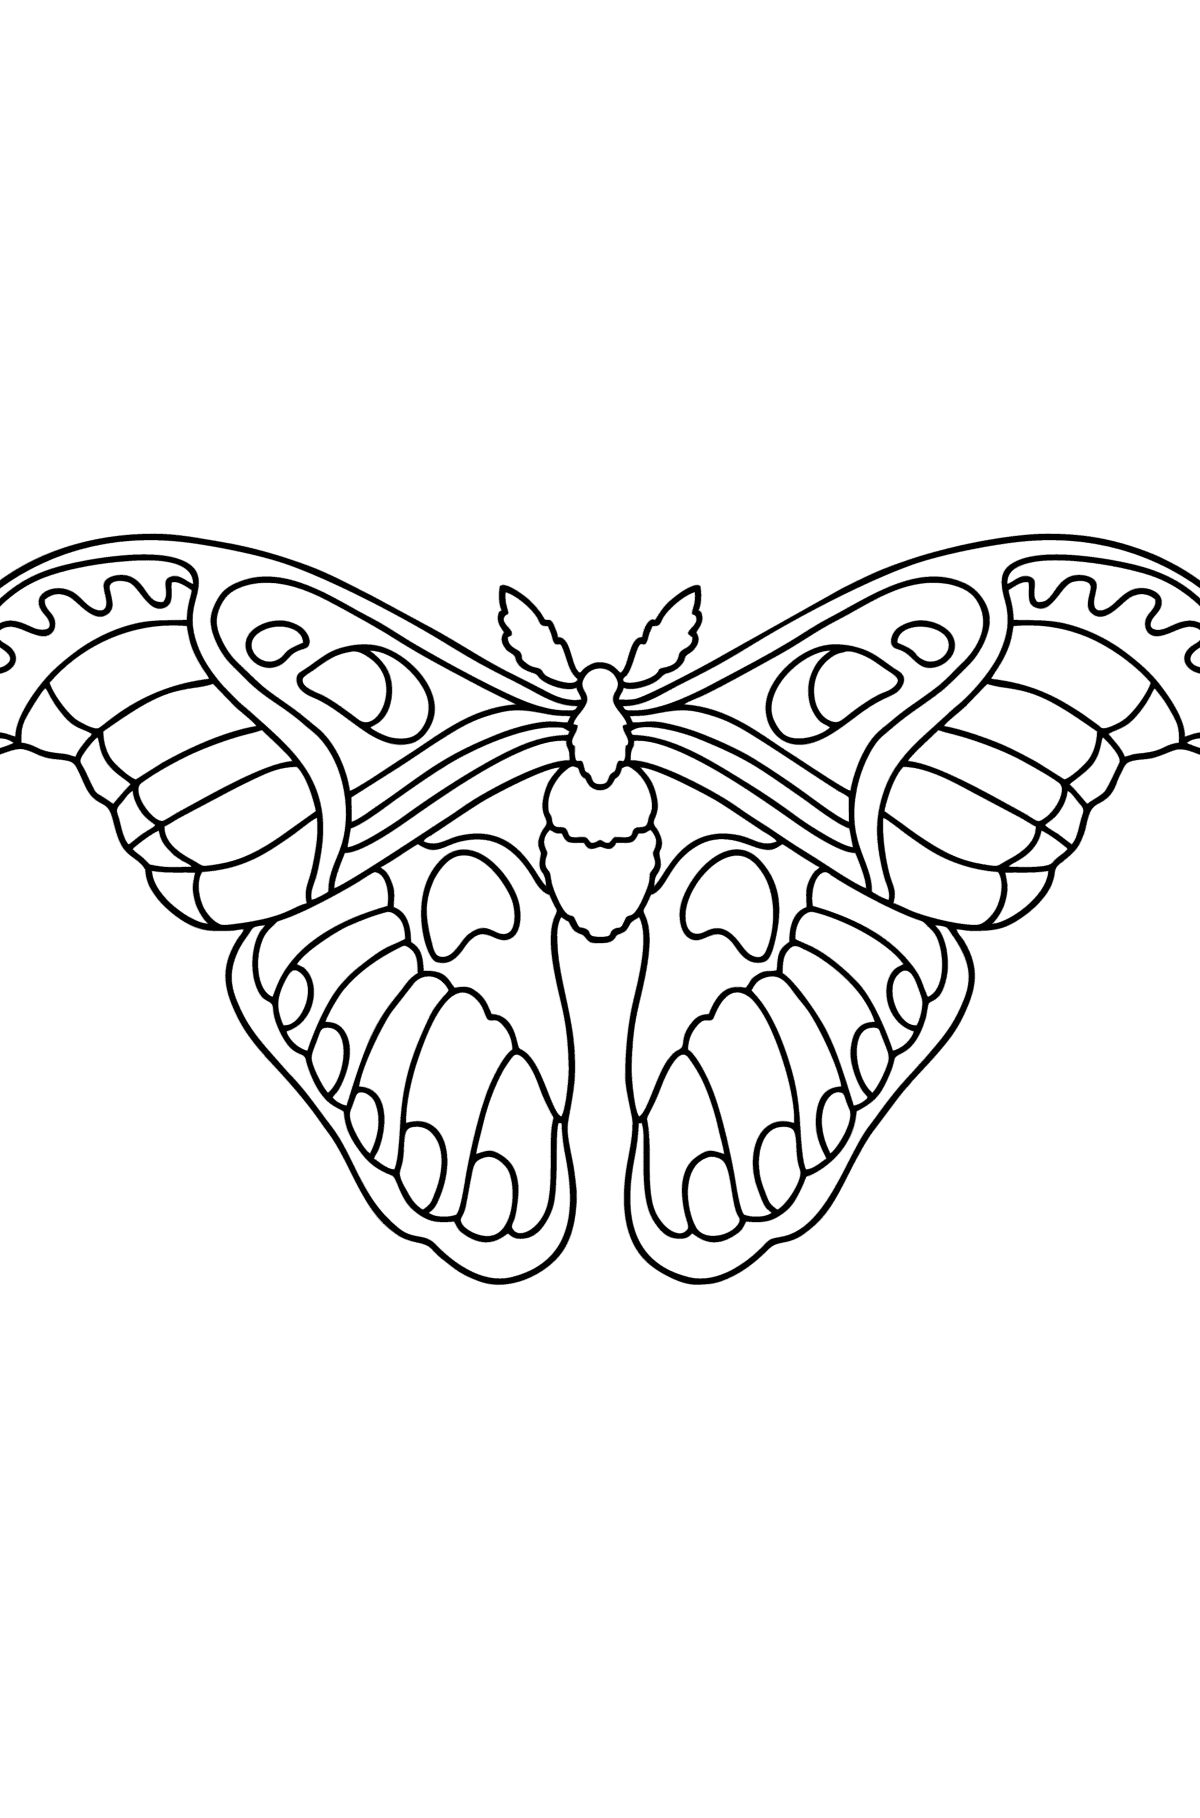 Satin Butterfly сoloring page - Coloring Pages for Kids